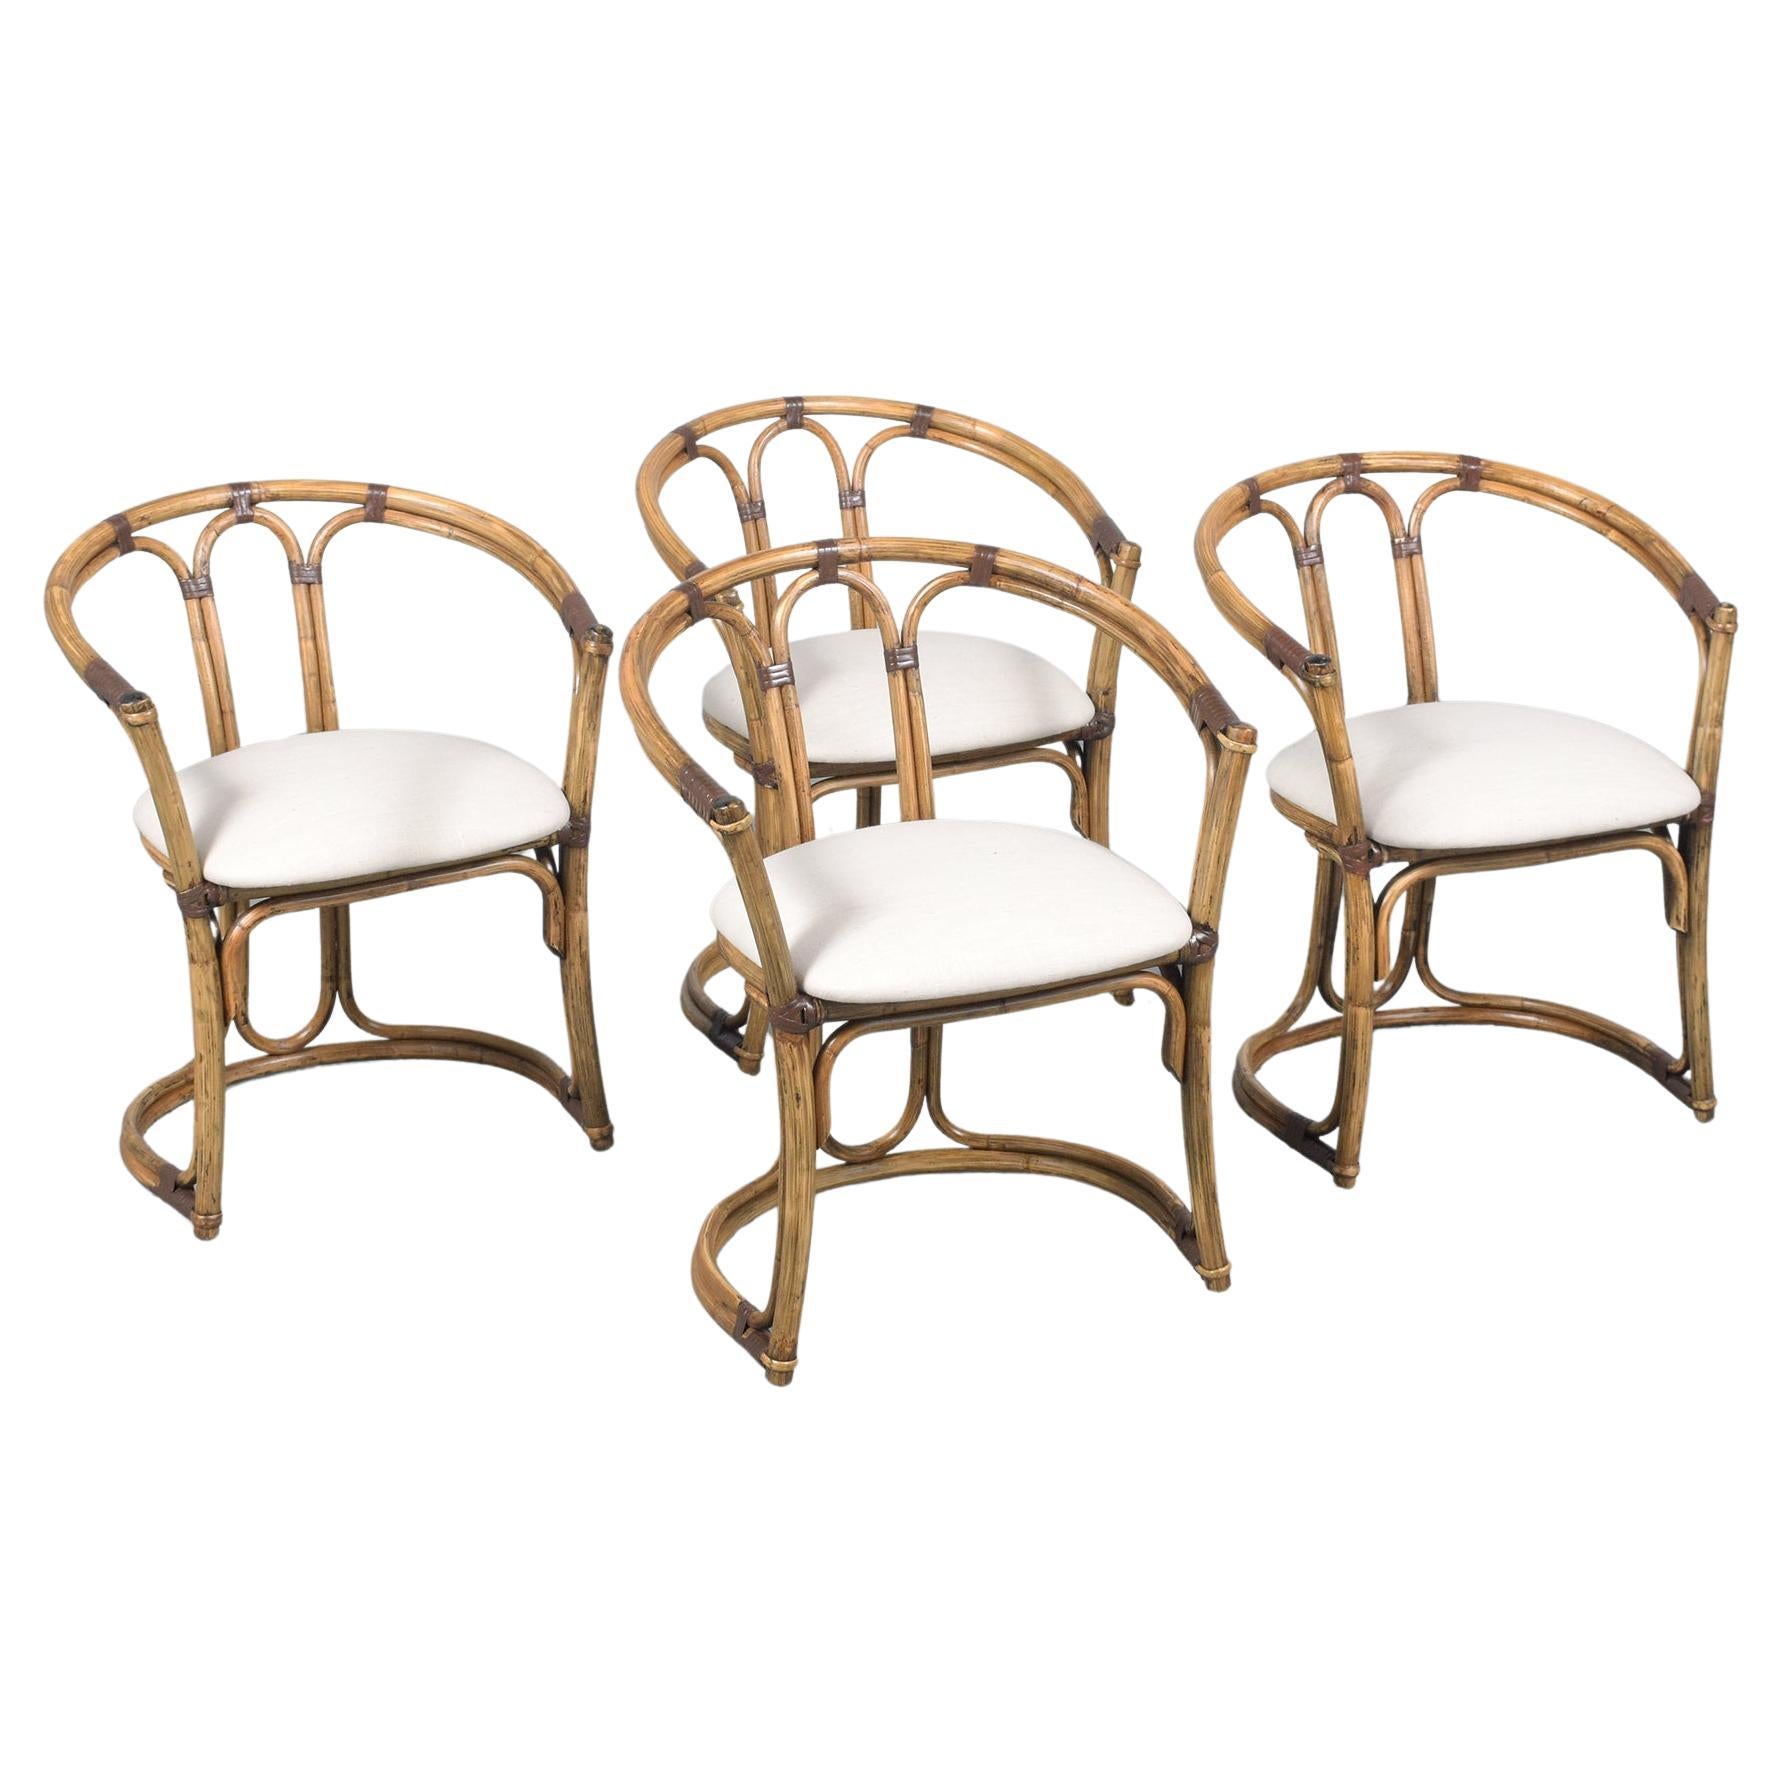 Set of Four Restored Vintage Bamboo Barrel Chairs with Ivory Upholstery For Sale